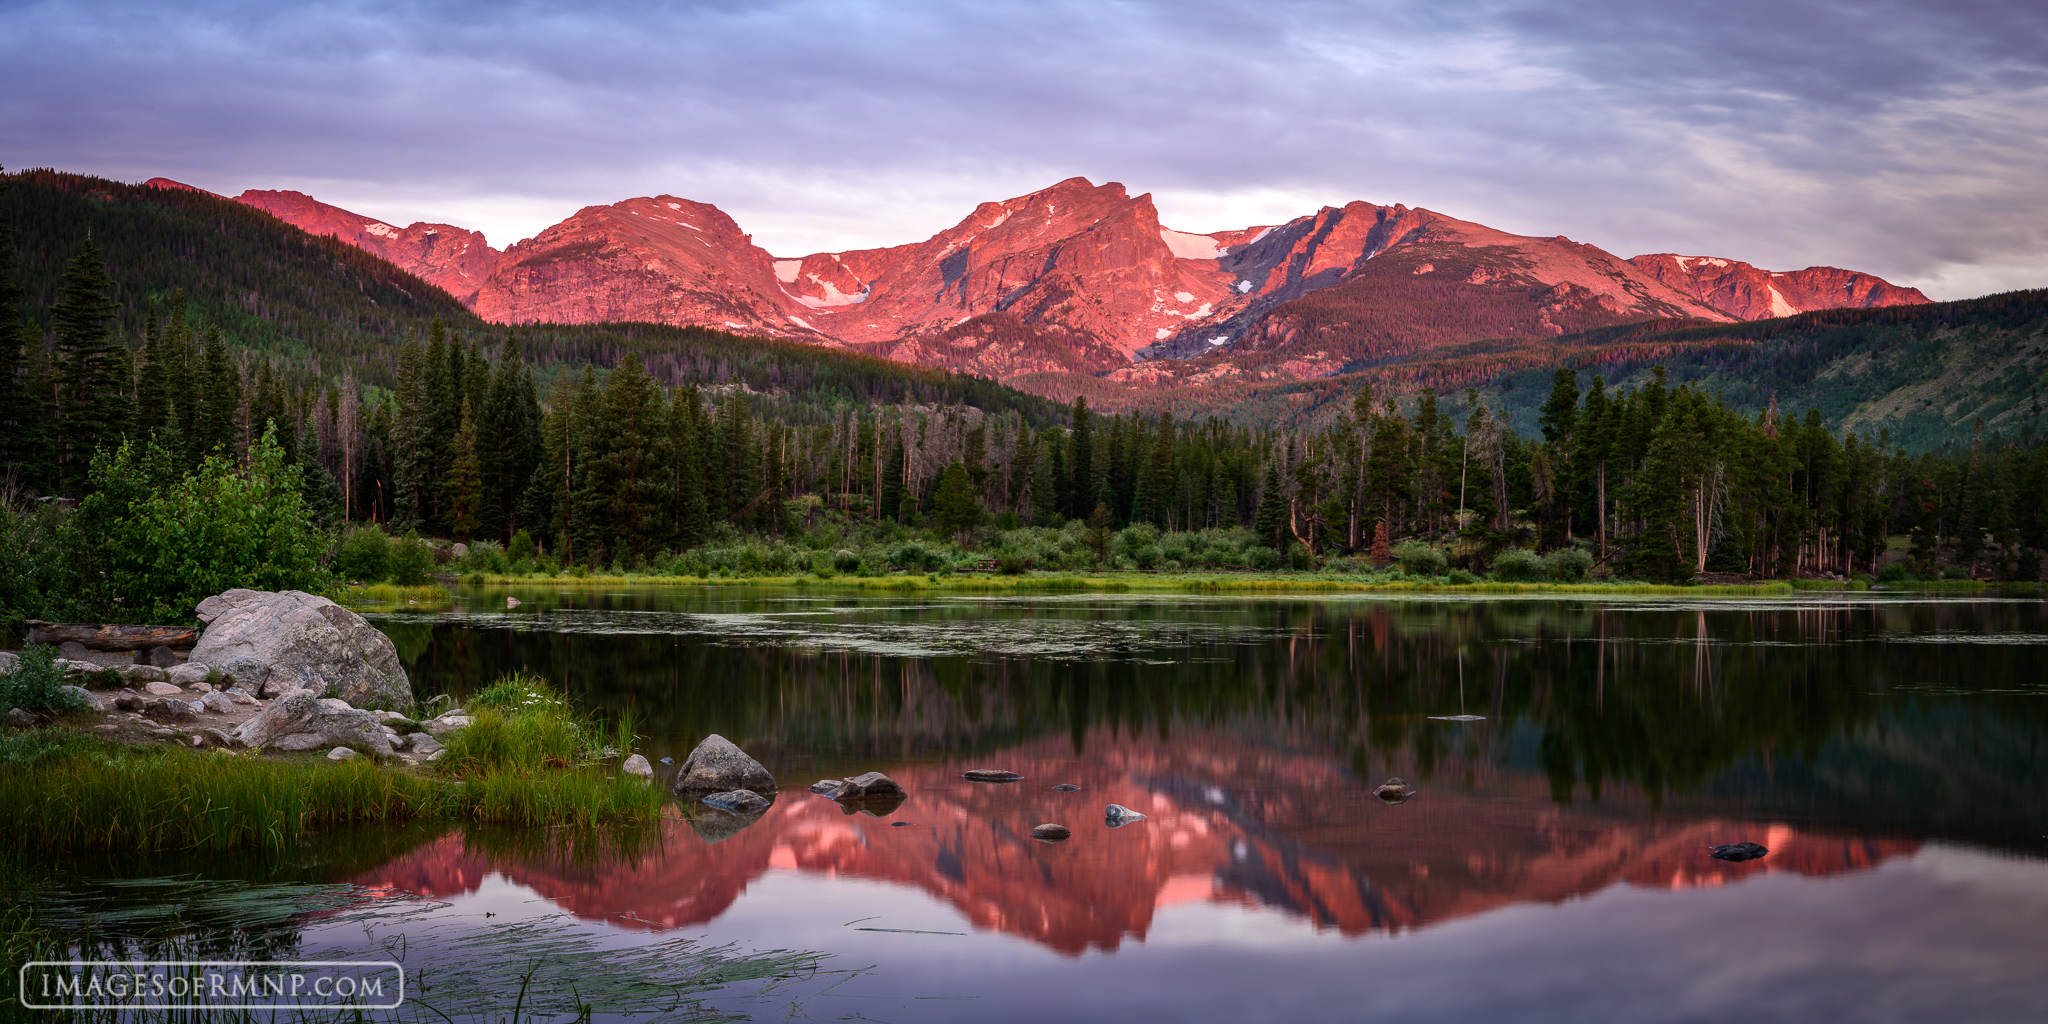 On this peaceful summer morning at Sprague Lake the wind held its breath as the mountains glowed in the warm gentle light of...